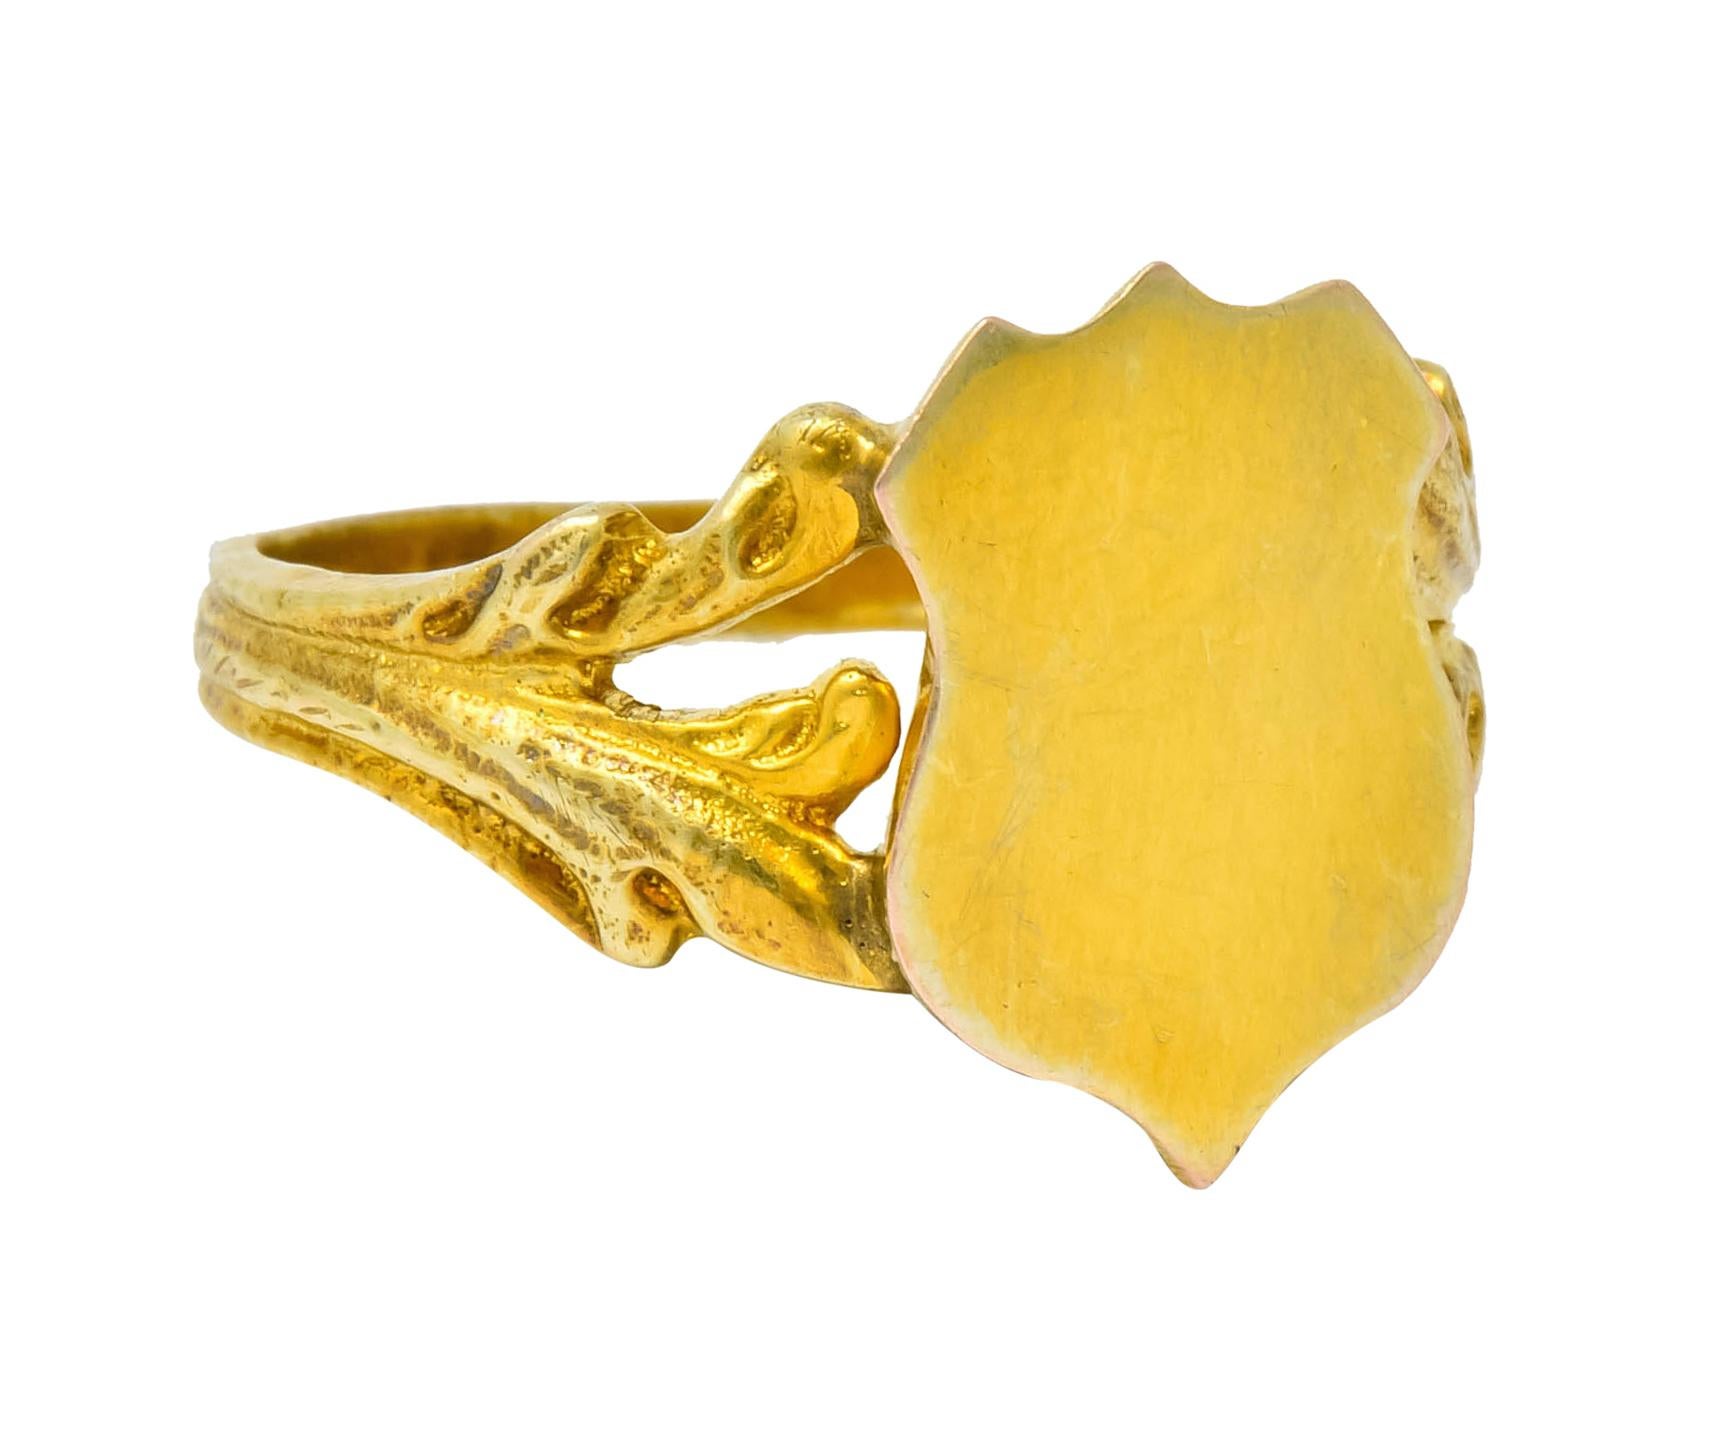 Signet style ring designed as a shield with a smooth, bright finish

Flanked by split shoulders with scrolling foliate motif and deeply ridged shank

Stamped K12 for 12 karat gold

Ring Size: 9 1/2 & sizable

Top measures: 15.8 mm and sits 2.4 mm